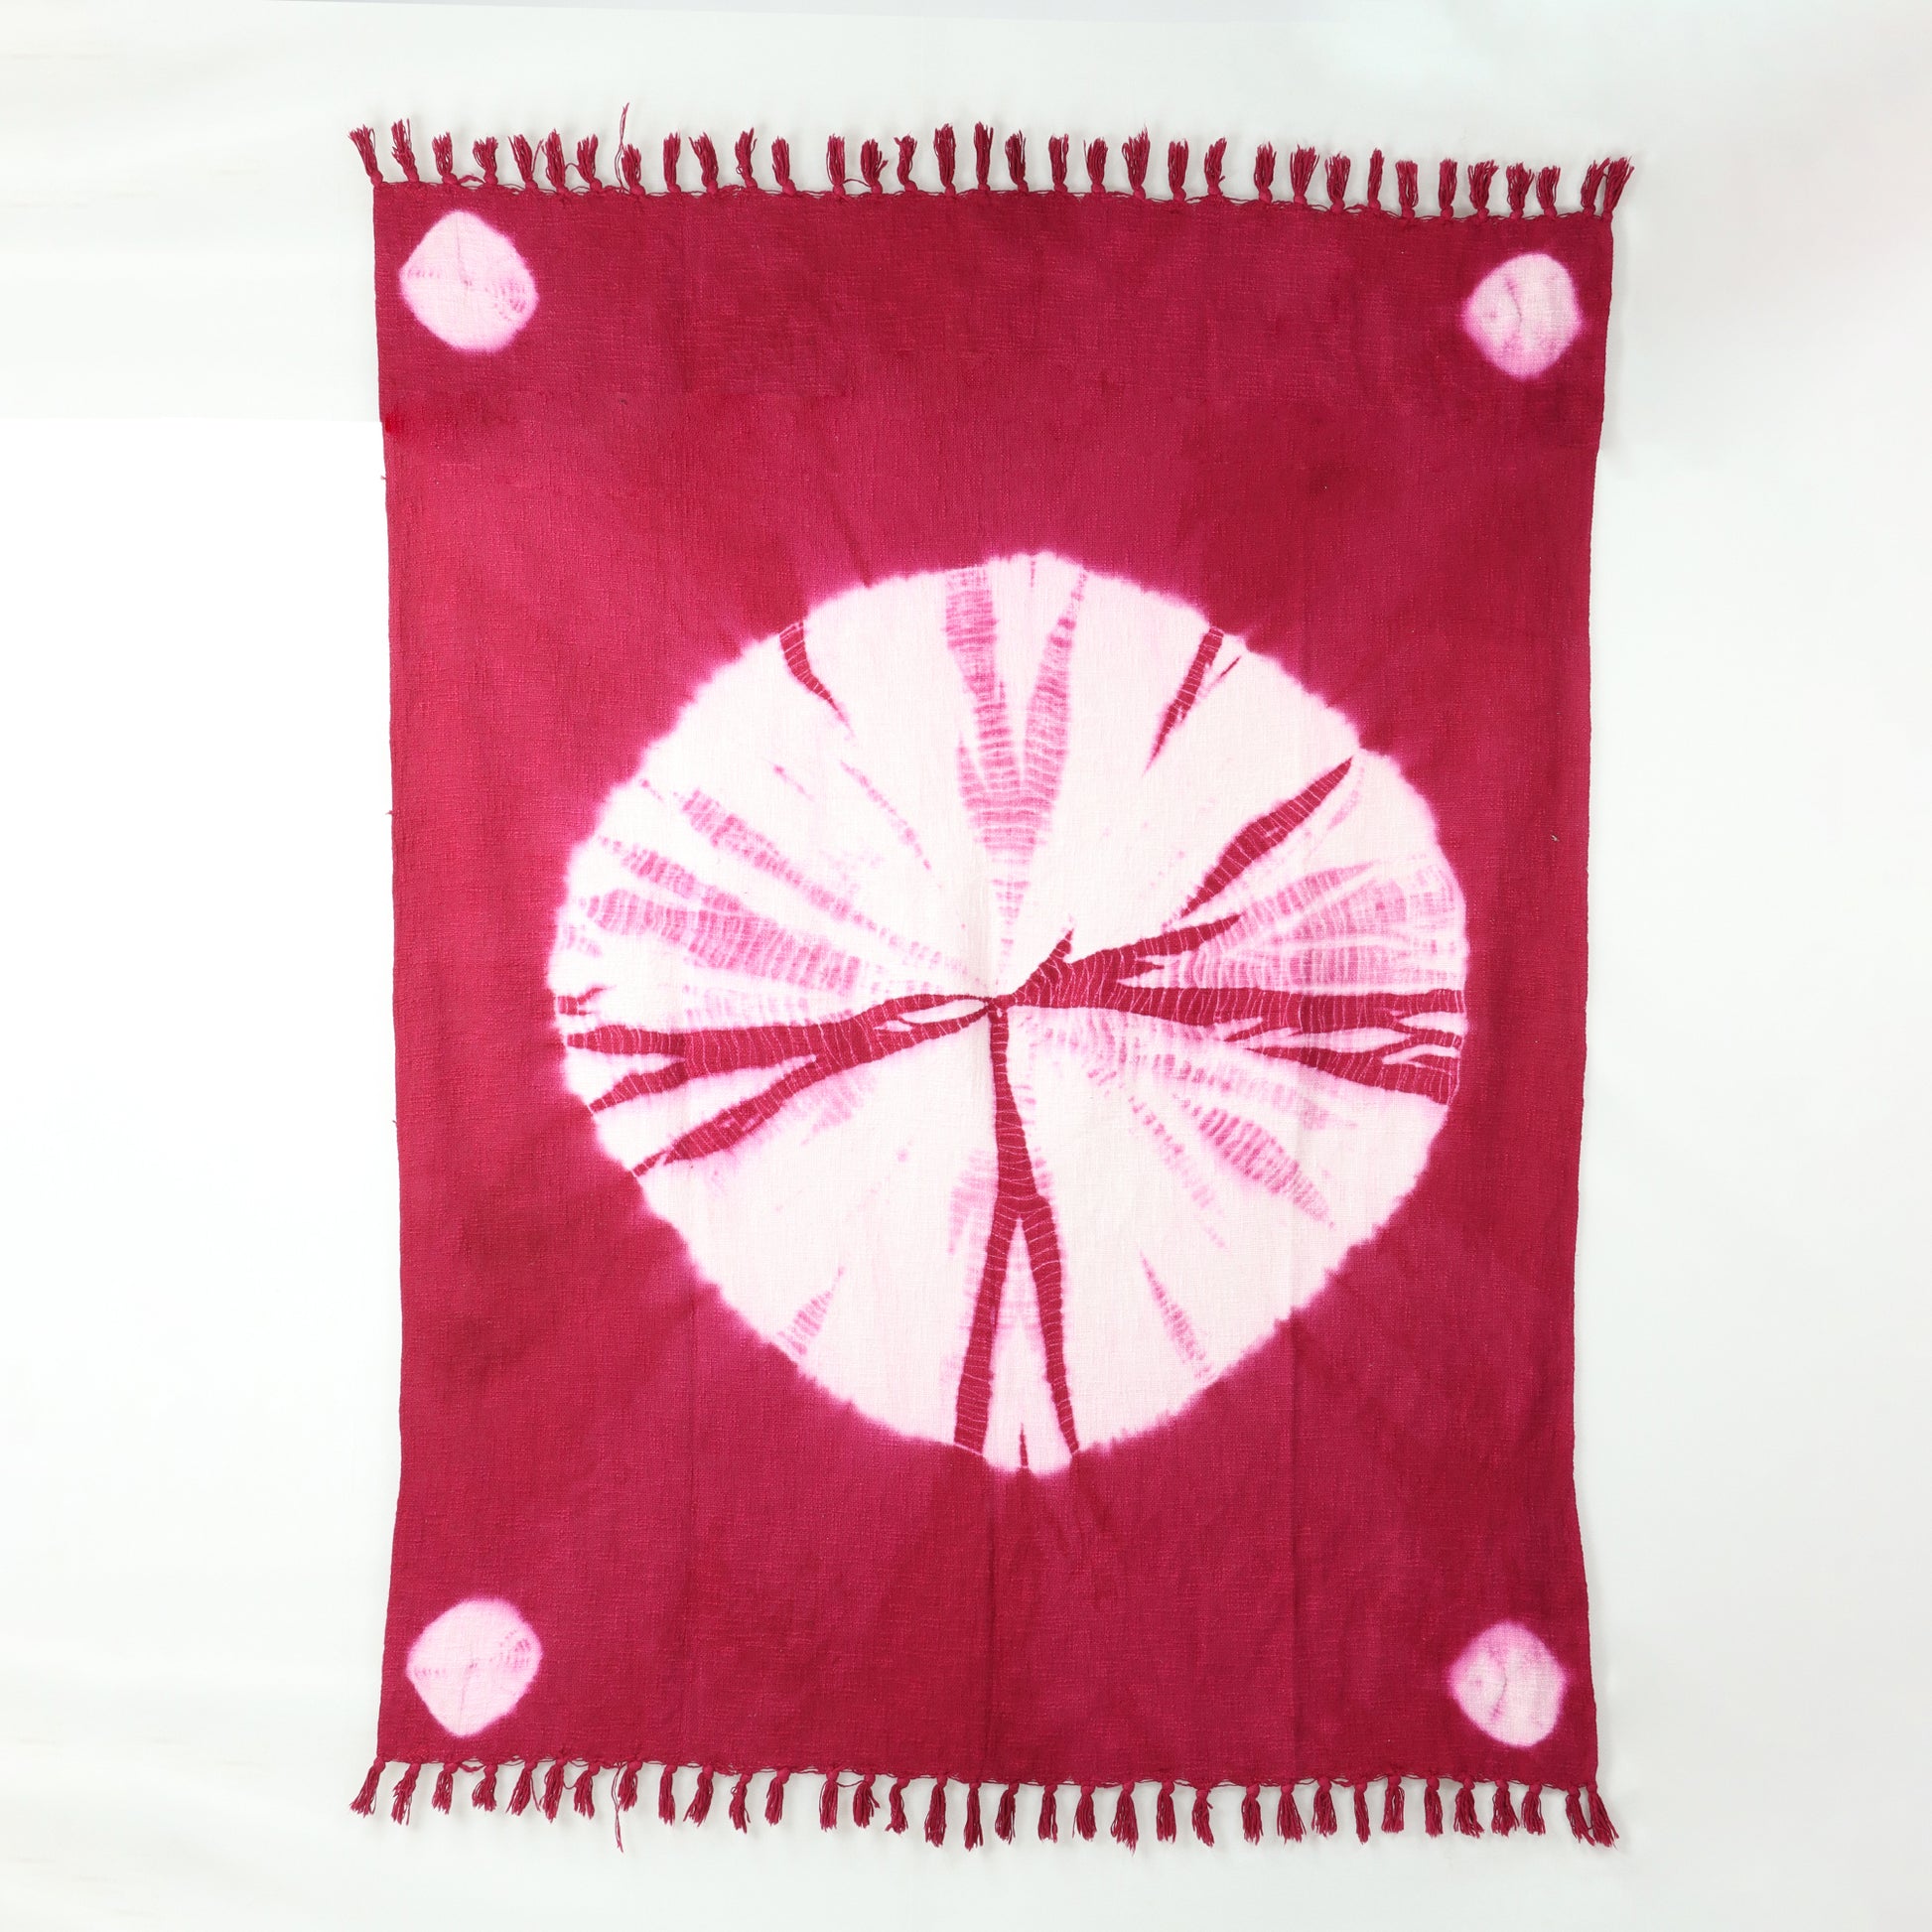 Red Tie Dye Sofa Throw Blankets For Home Decor Online